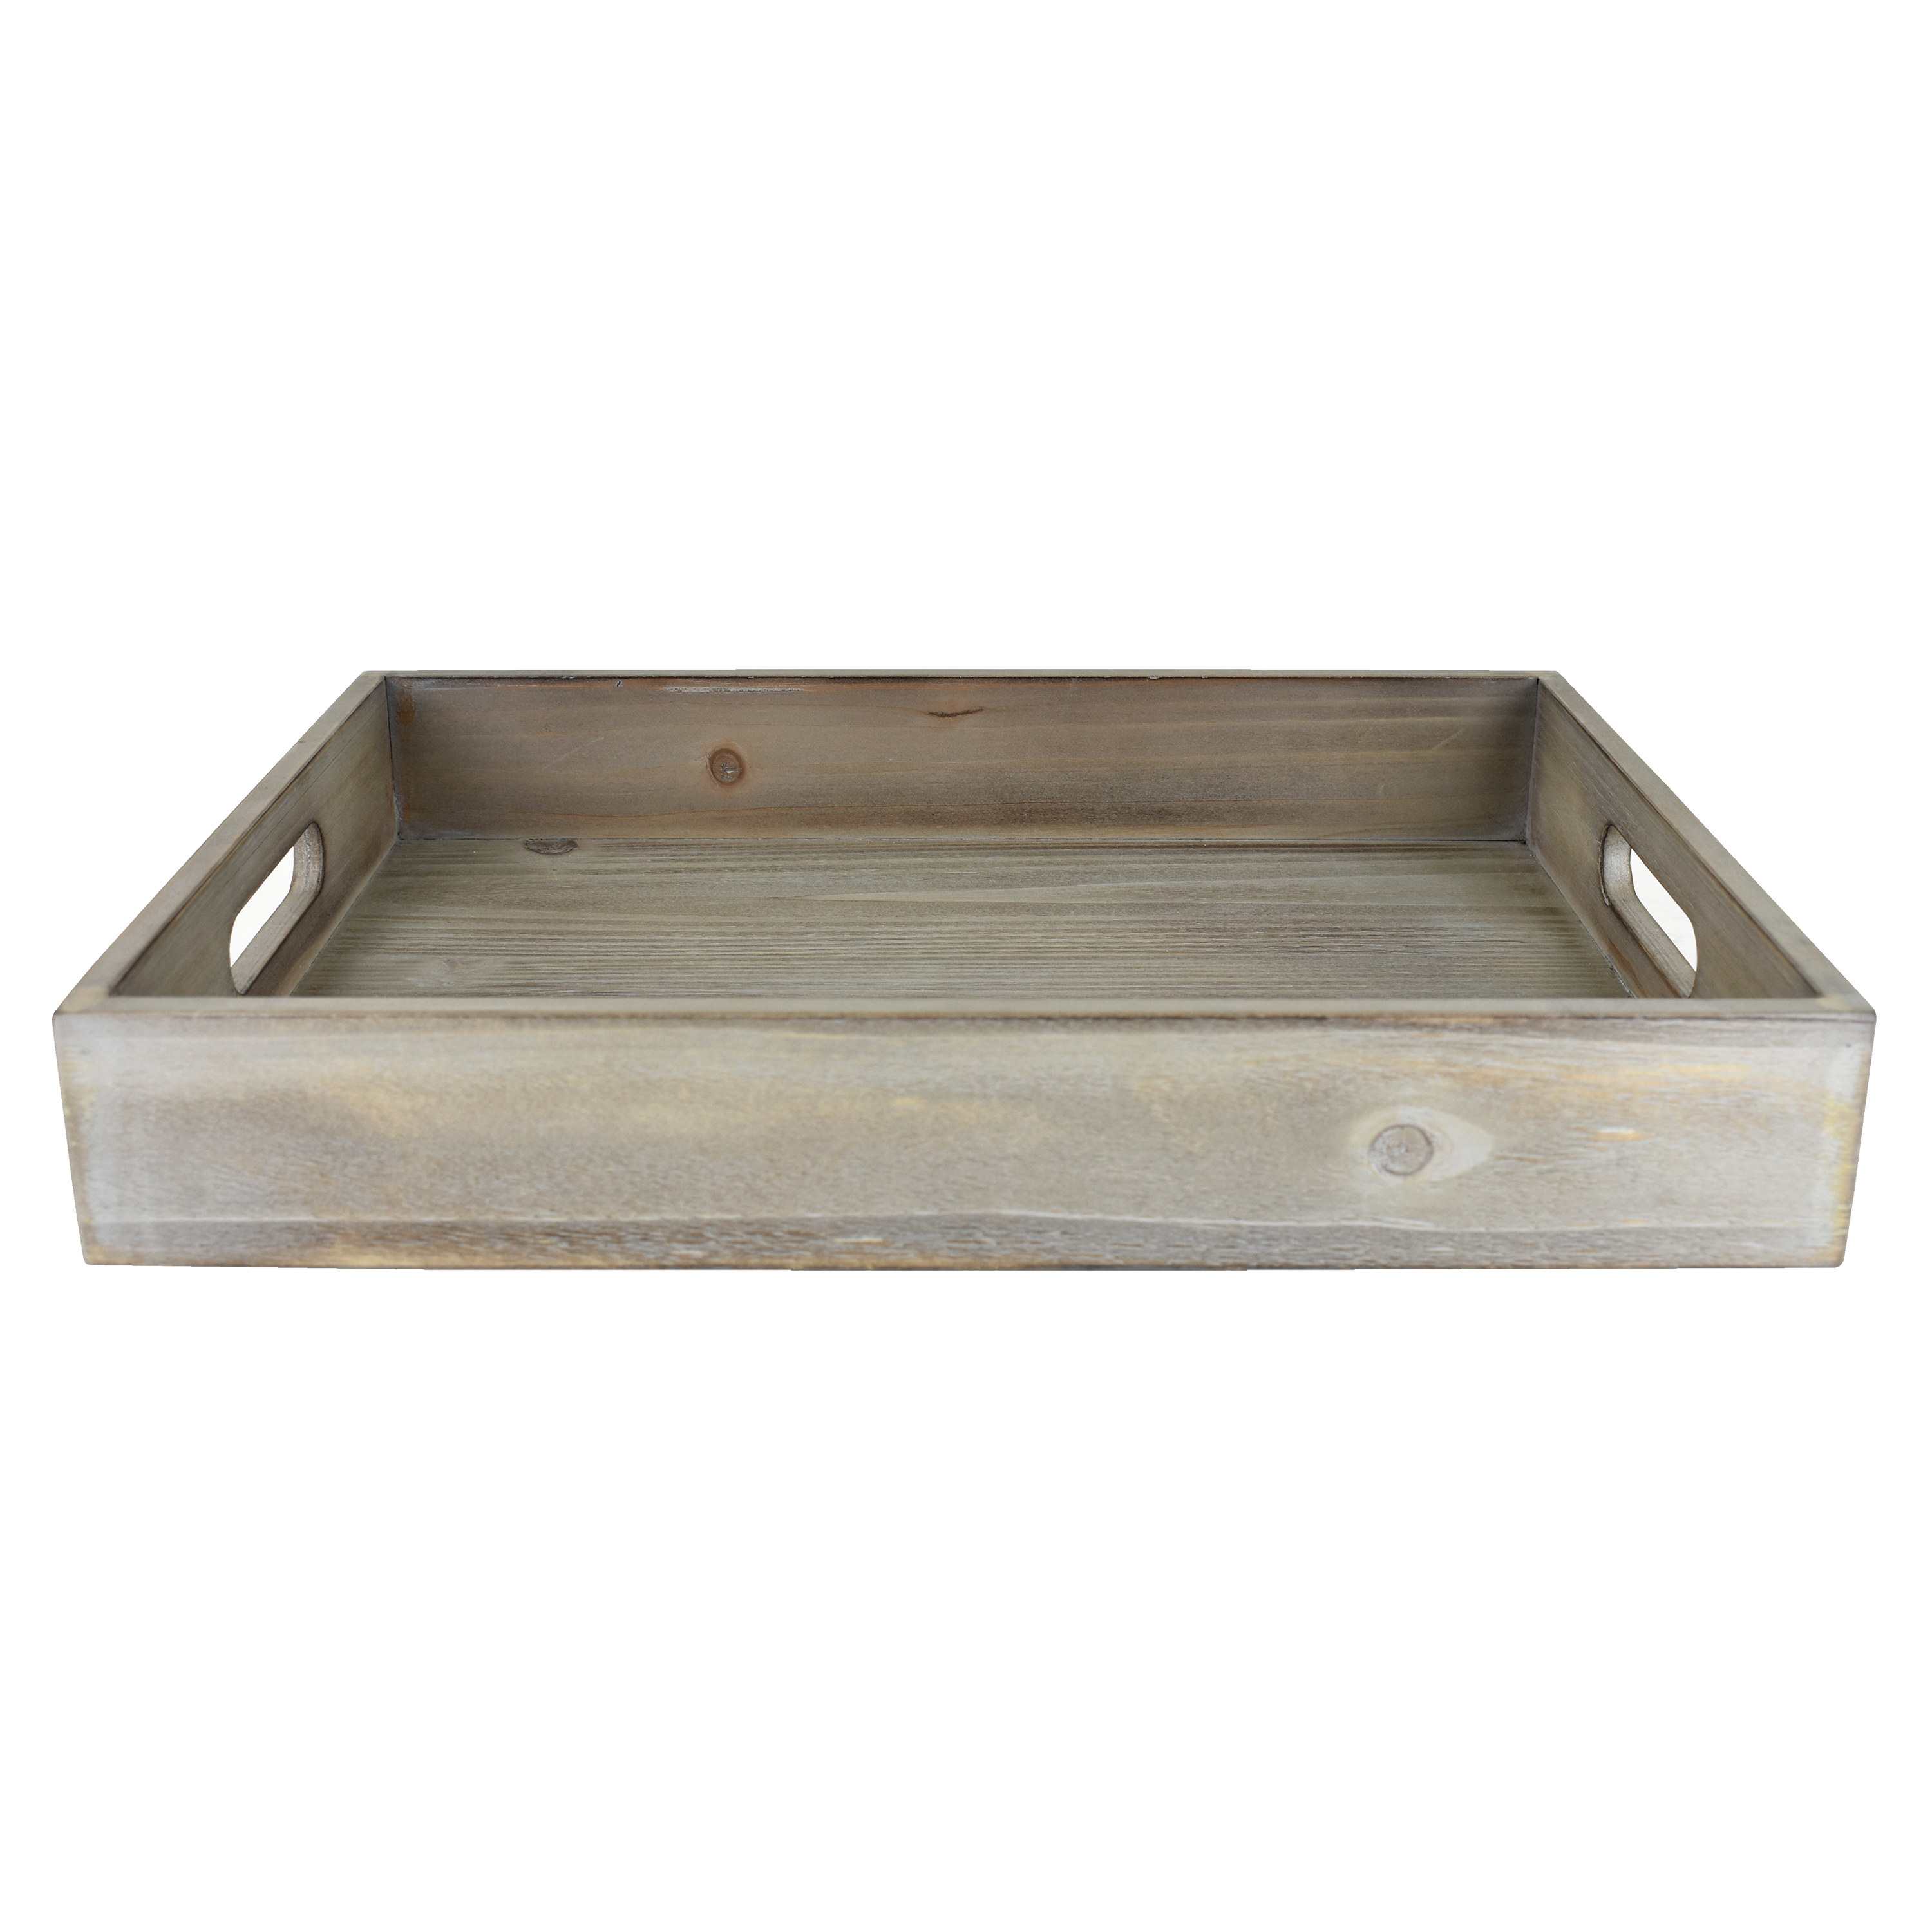 Mainstays Tabletop Rectangle 16" x 12" x 2.5" Wooden Tray, Gray Wash - image 3 of 4